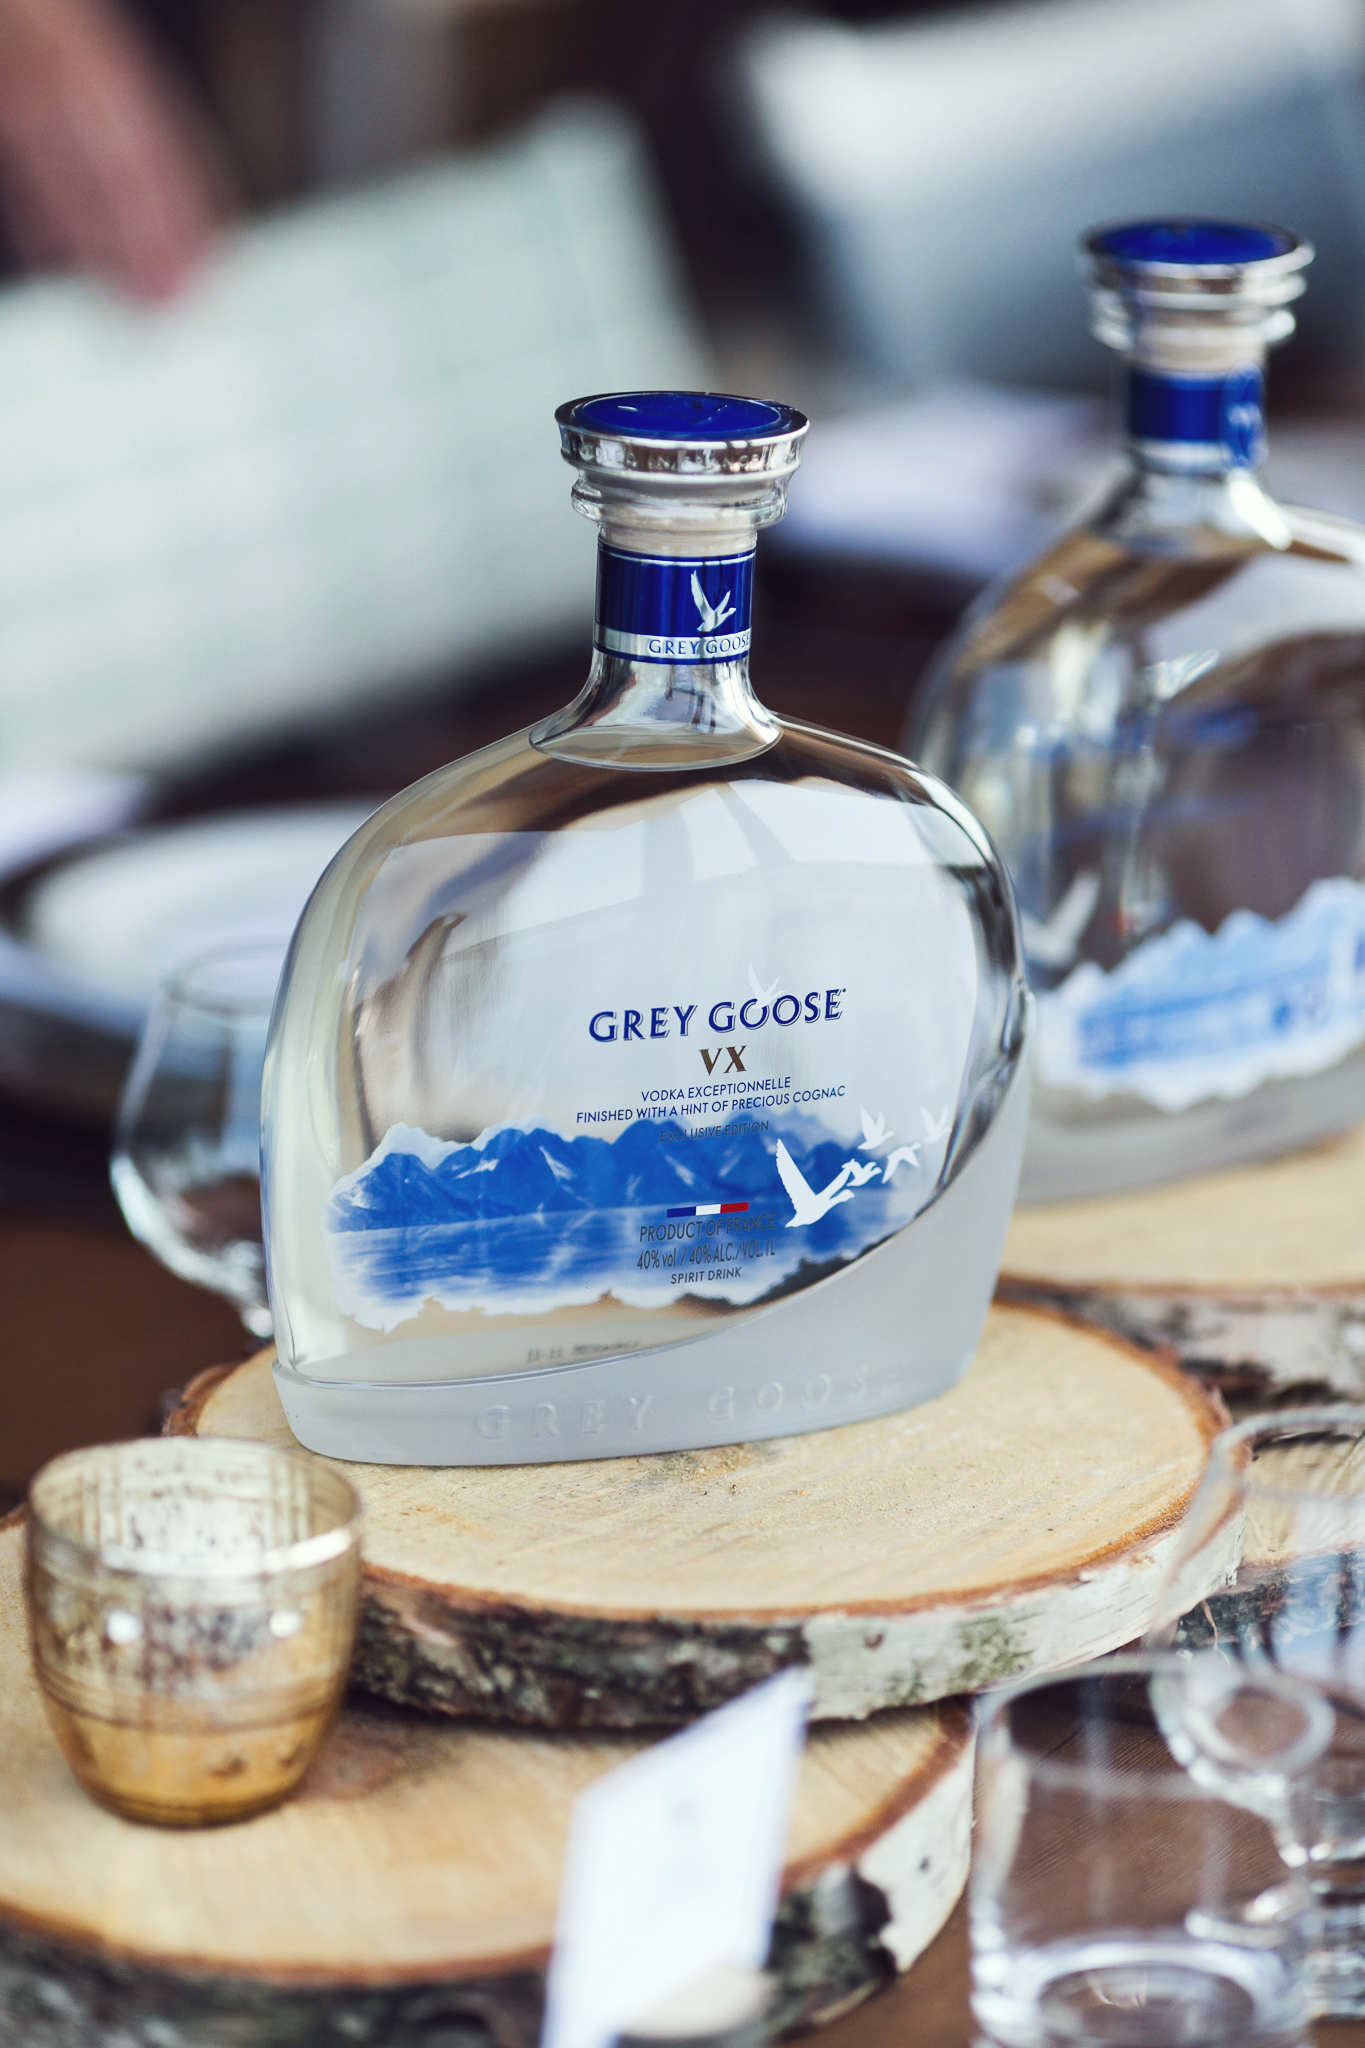 GREY GOOSE® VODKA INTRODUCES THE PERFECT READY TO SERVE MARTINI COCKTAIL IN  A BOTTLE